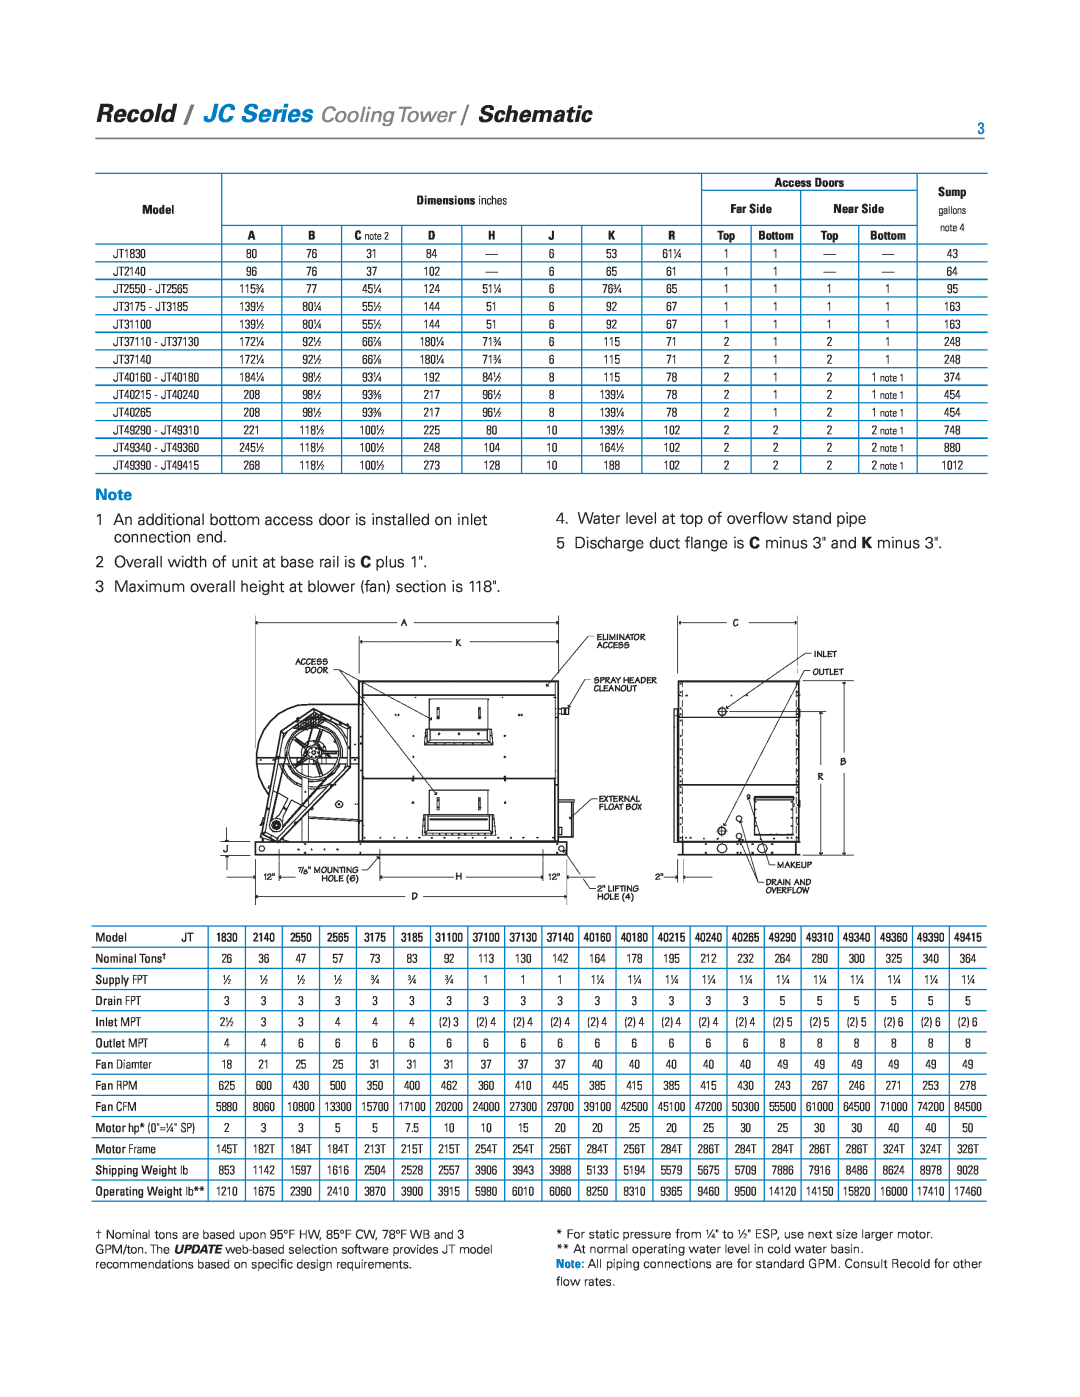 SPX Cooling Technologies JT Series Recold / JC Series CoolingTower, Schematic, Access Doors, Model, Dimensions inches 